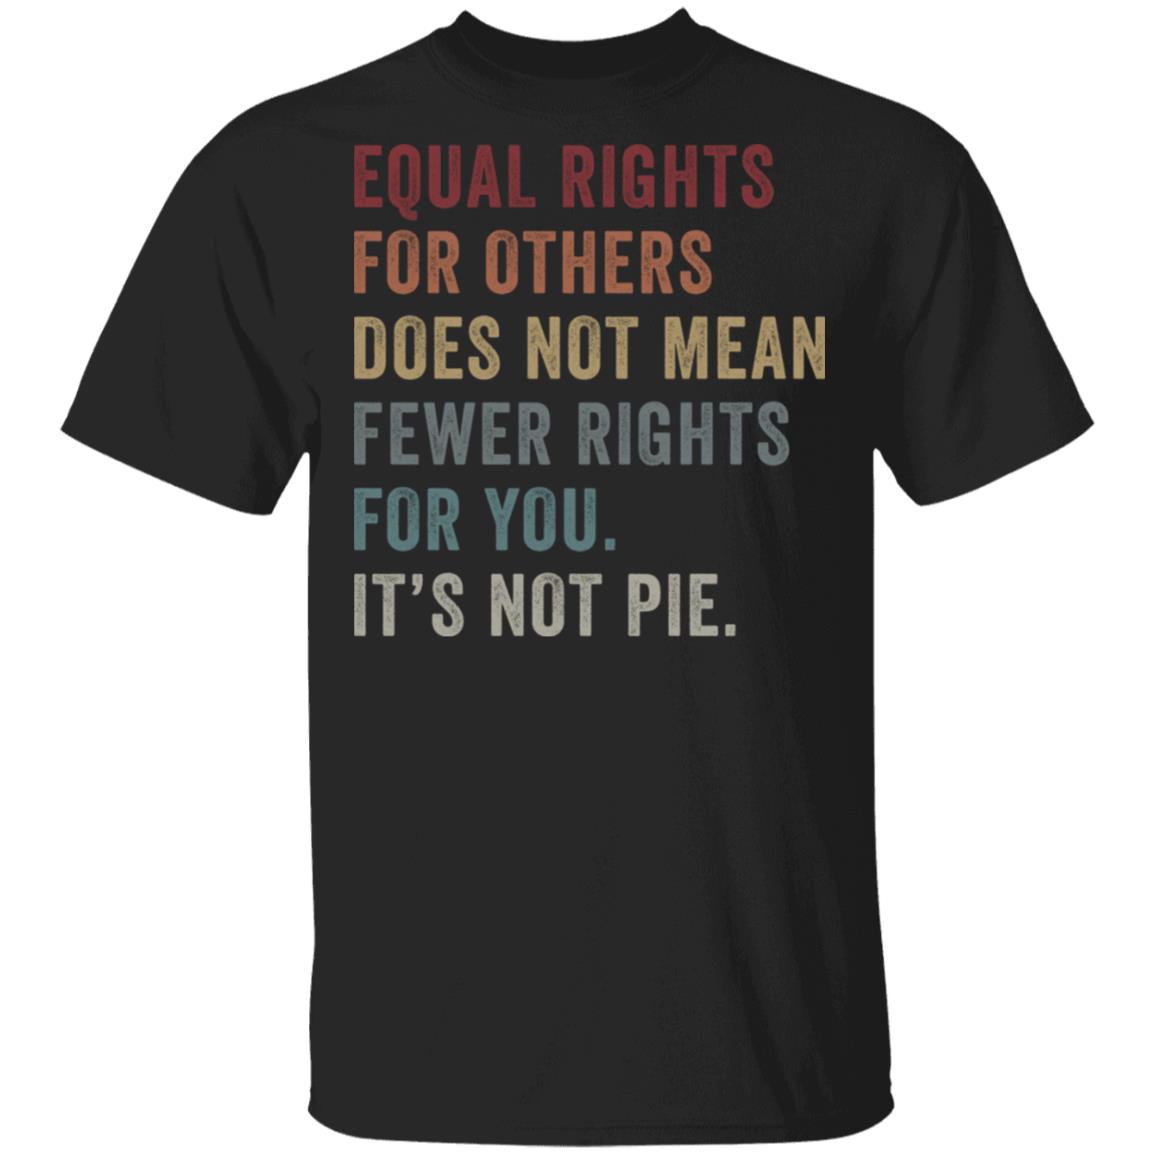 Equal rights for others does not mean fewer rights for you it's not pie ...